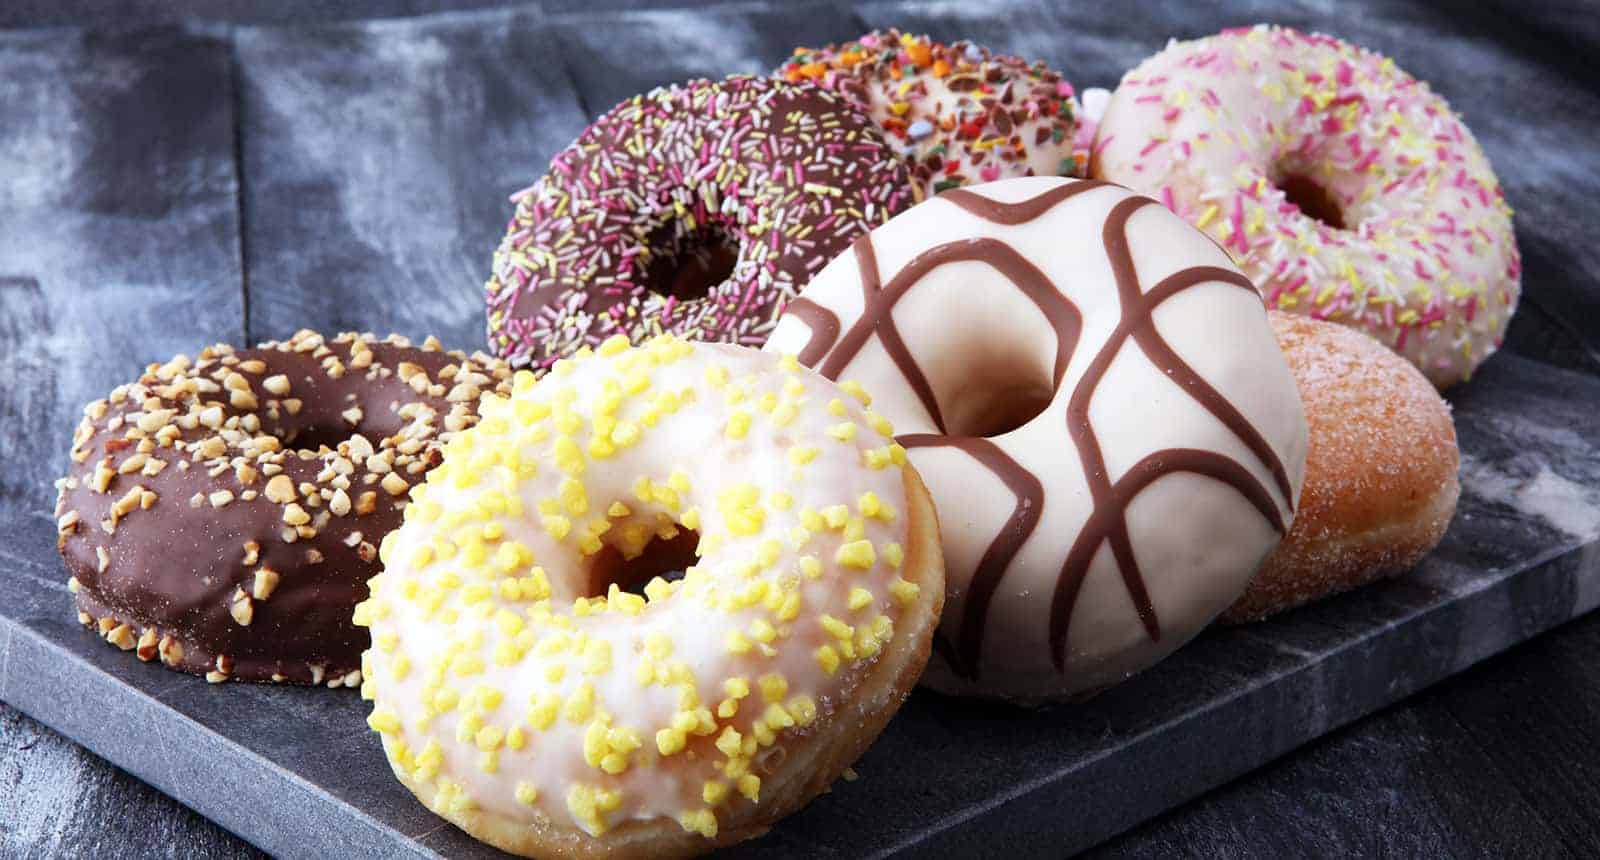 How To Make Donuts Without Donut Pan